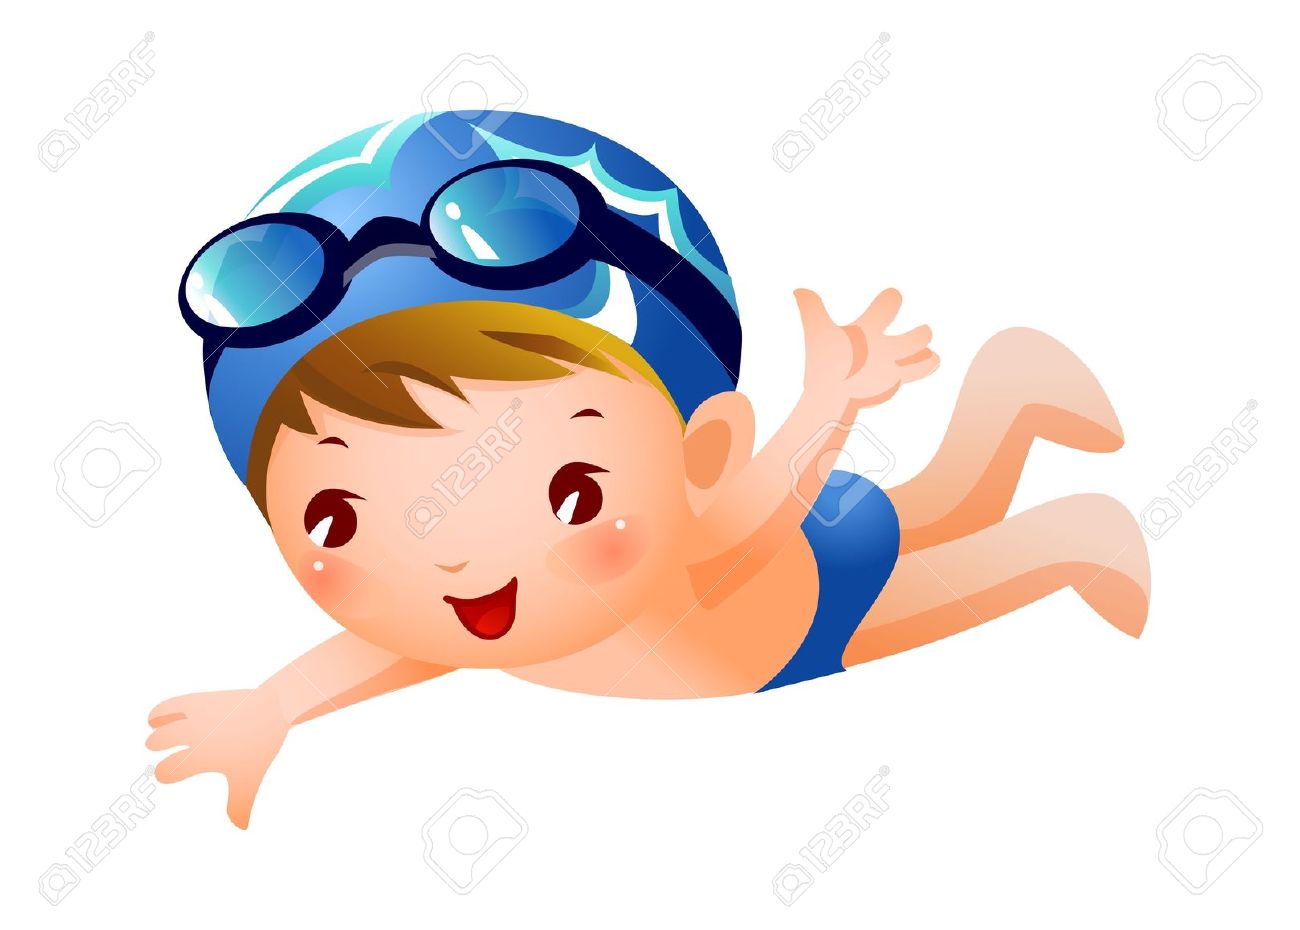 Boy swimming clipart 11 » Clipart Station.